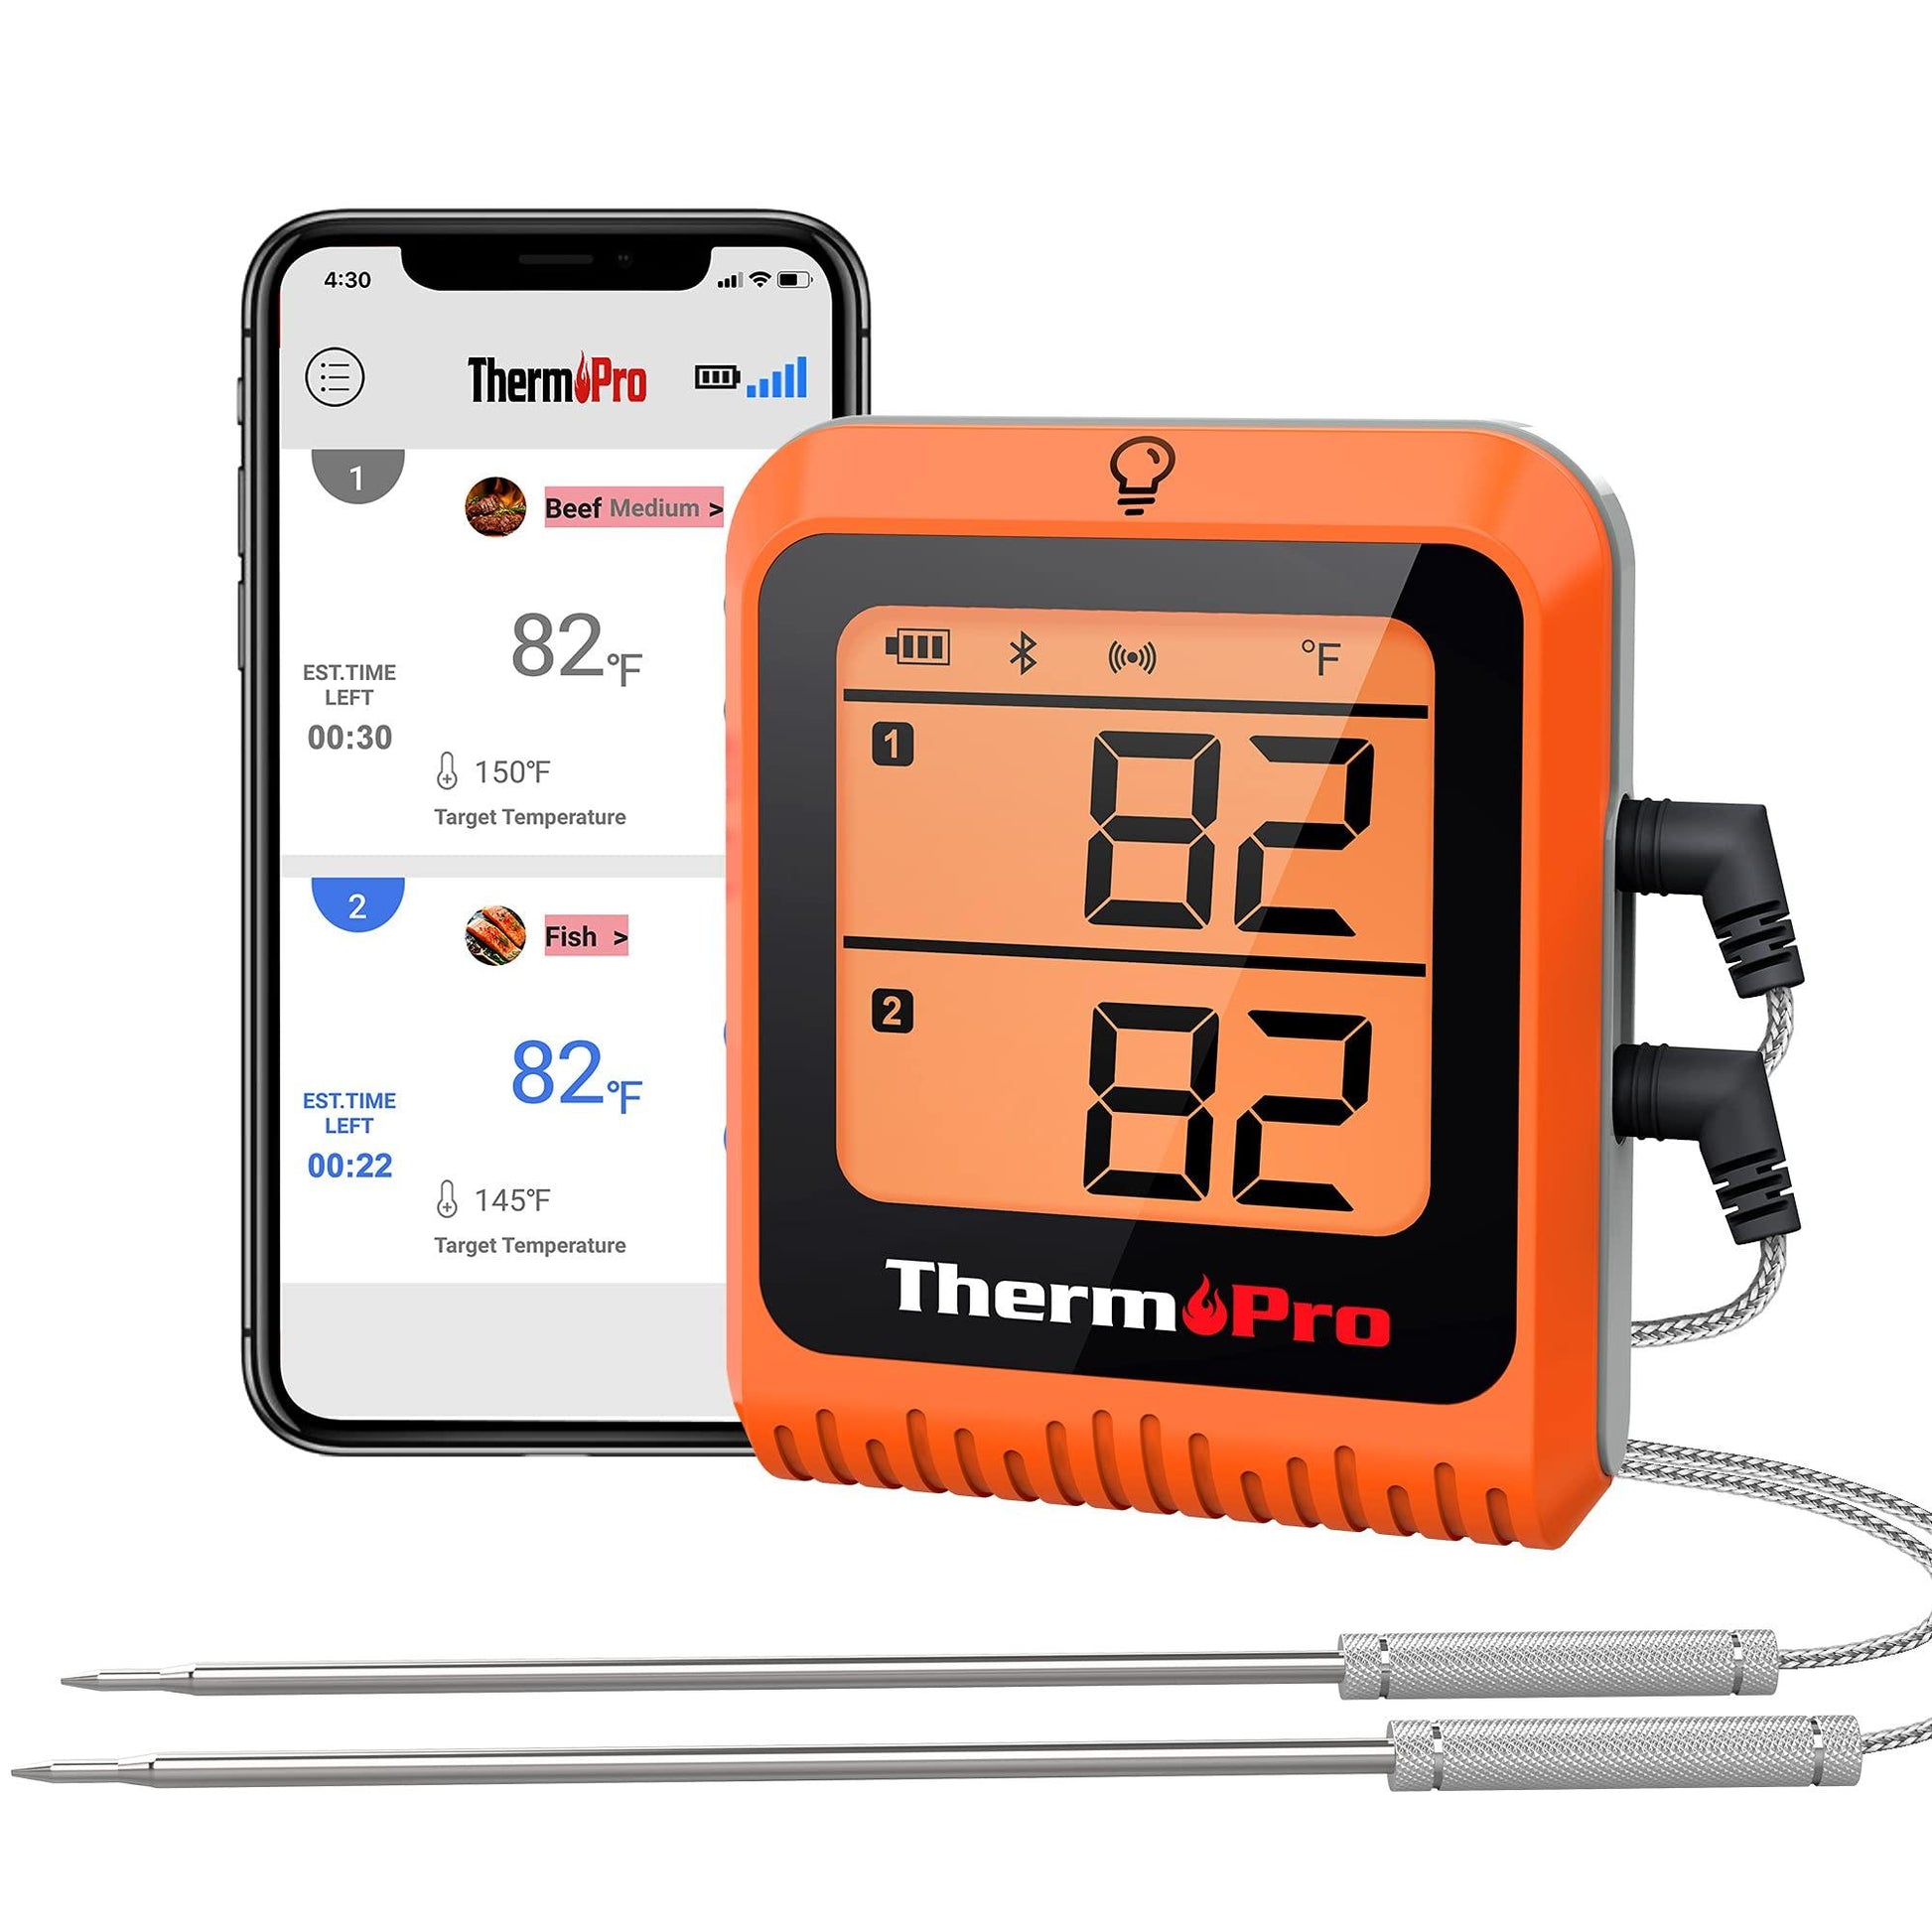 ThermoPro Wireless Meat Thermometer of 650FT for Smoker Oven, Bluetooth Grill Thermometer with Dual Probes, Smart Rechargeable BBQ thermometer for Cooking Turkey Fish Beef - CookCave